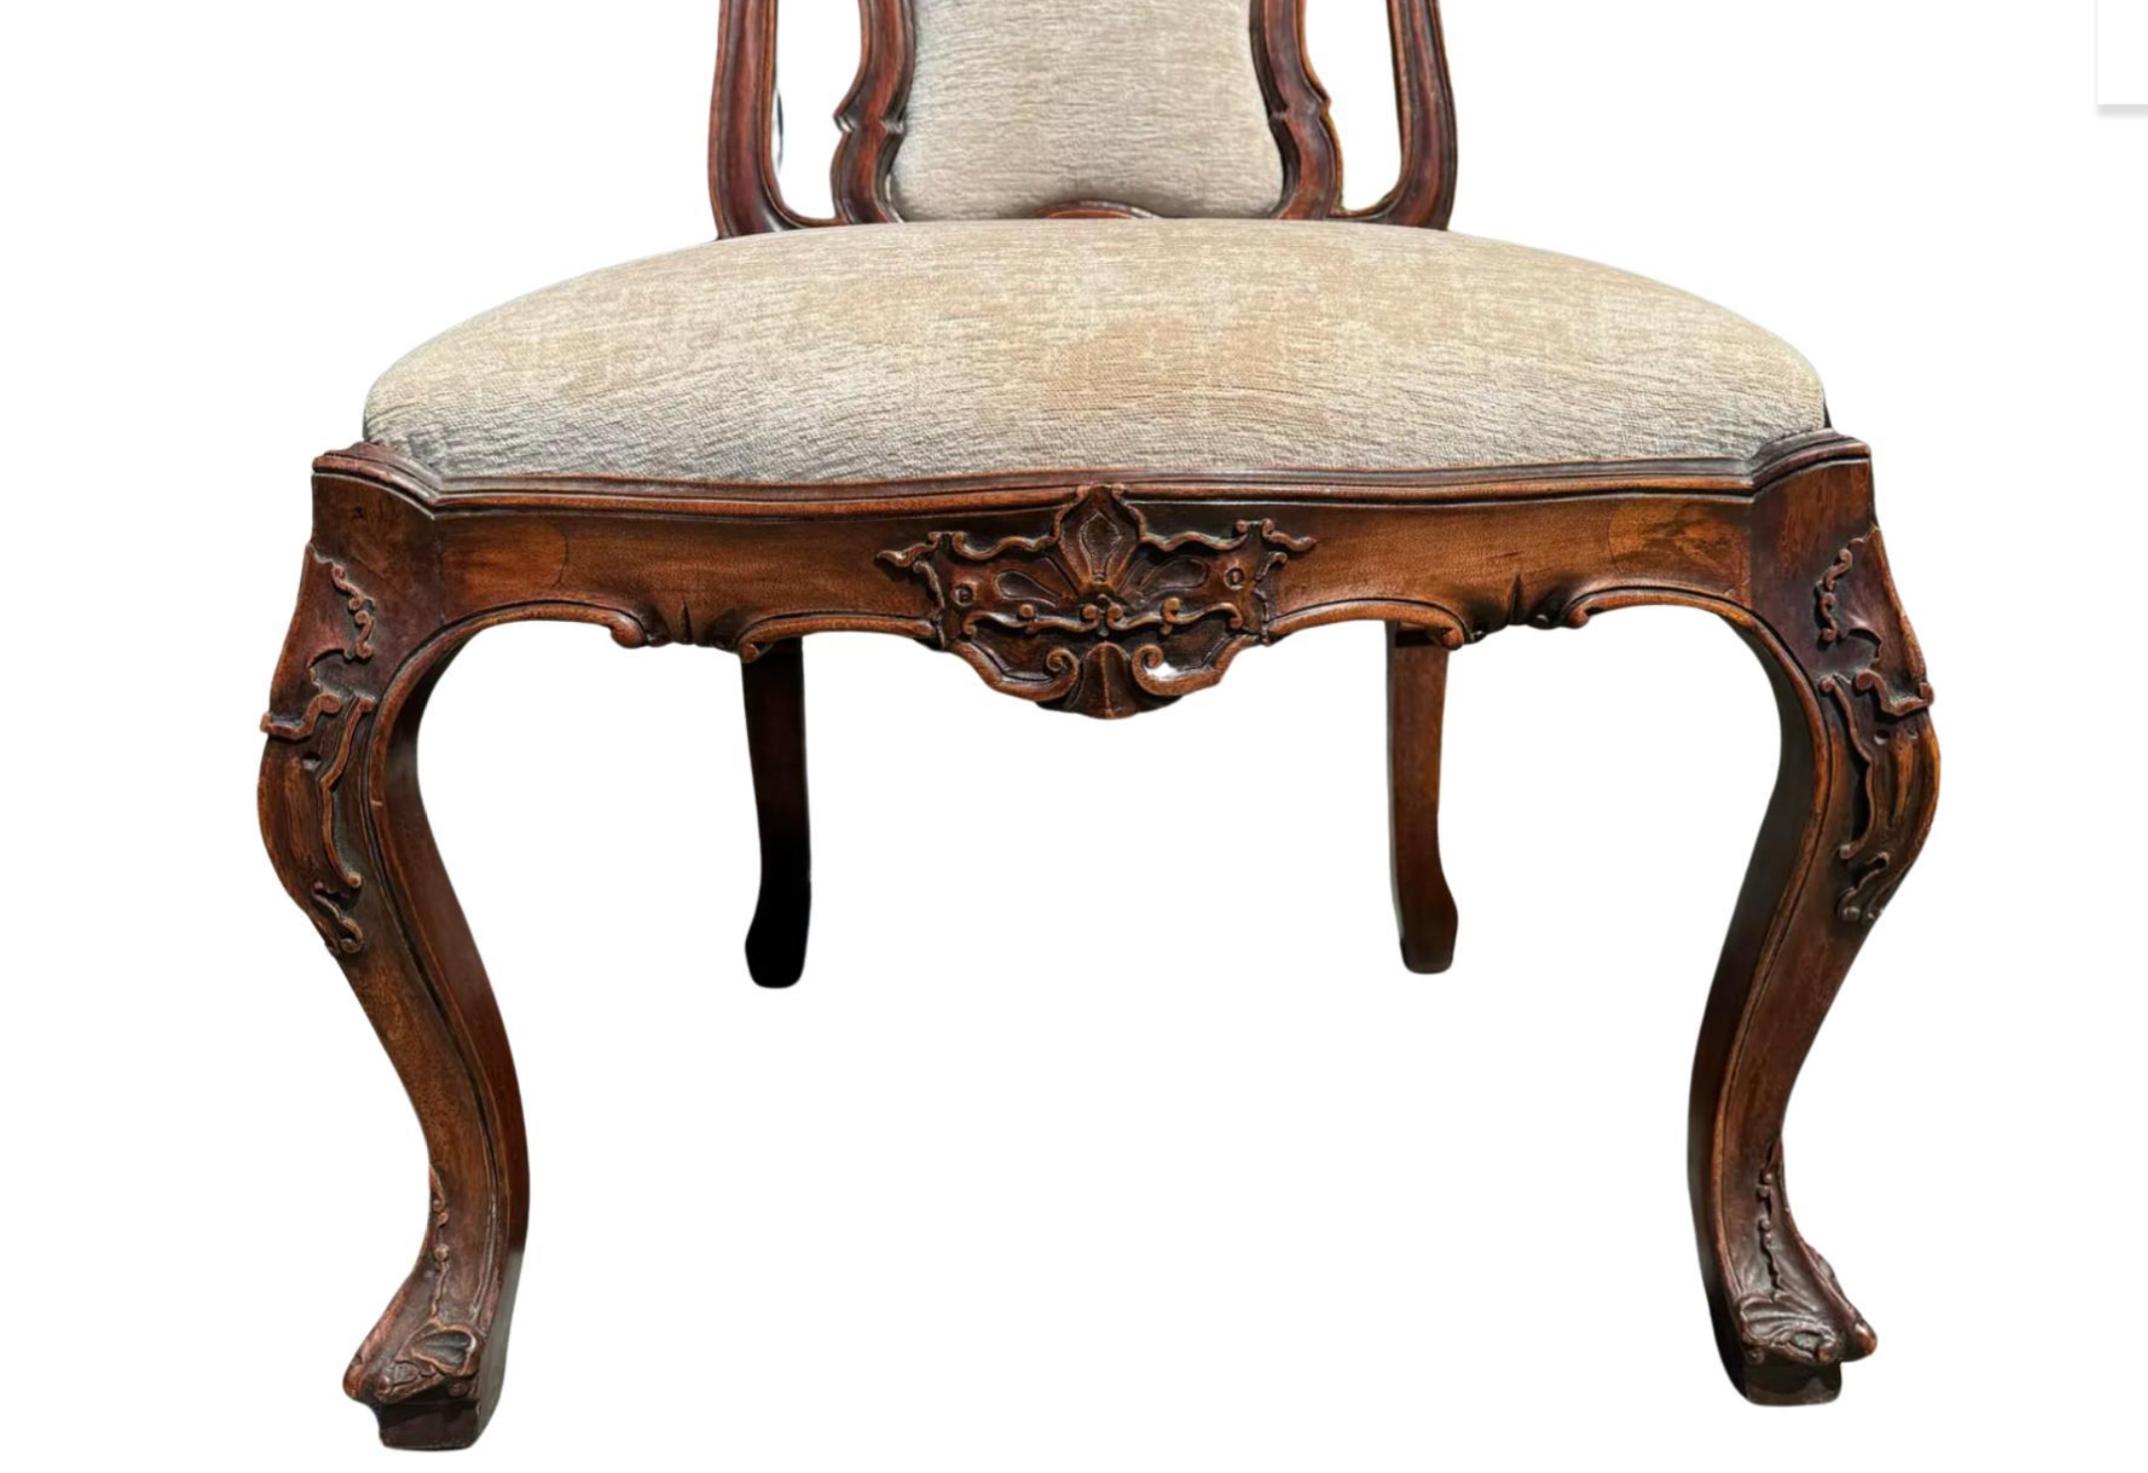 Pair of 18th C Style Portuguese Dining Chair by Randy Esada Designs. This listing is for two chairs but we actually have six chairs available. Sol in pairs.